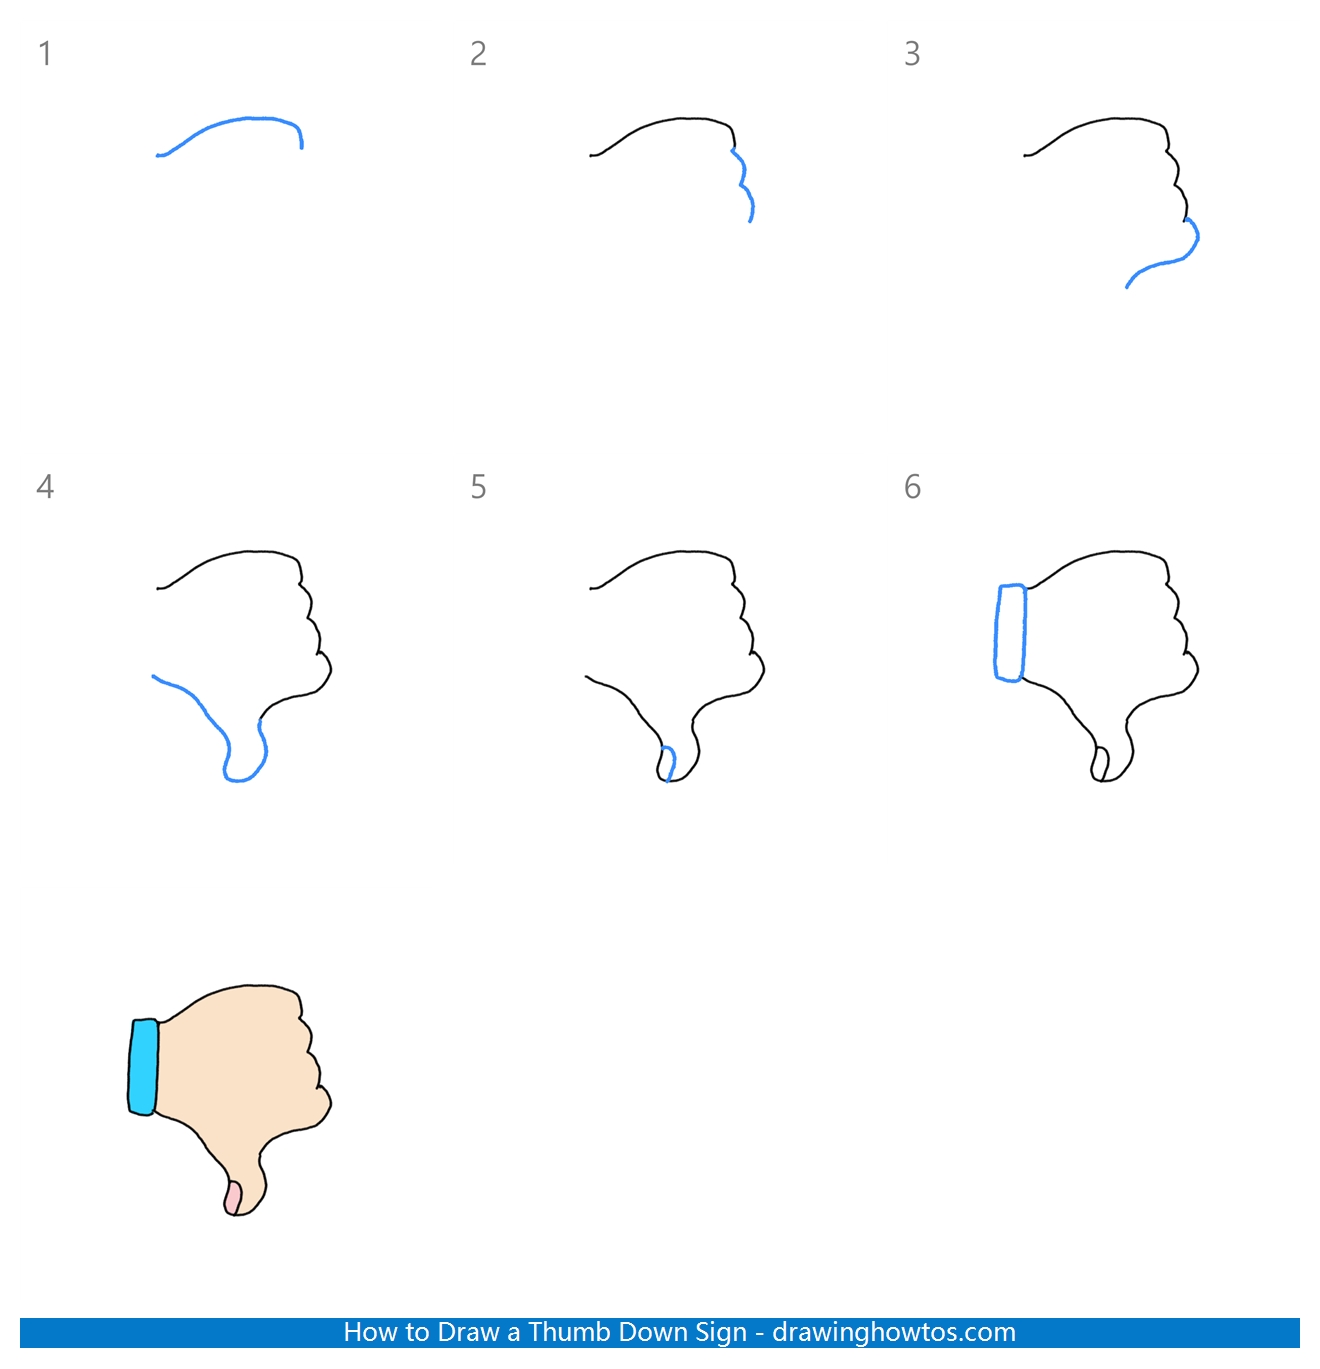 How to Draw a Thumb Down Sign Step by Step